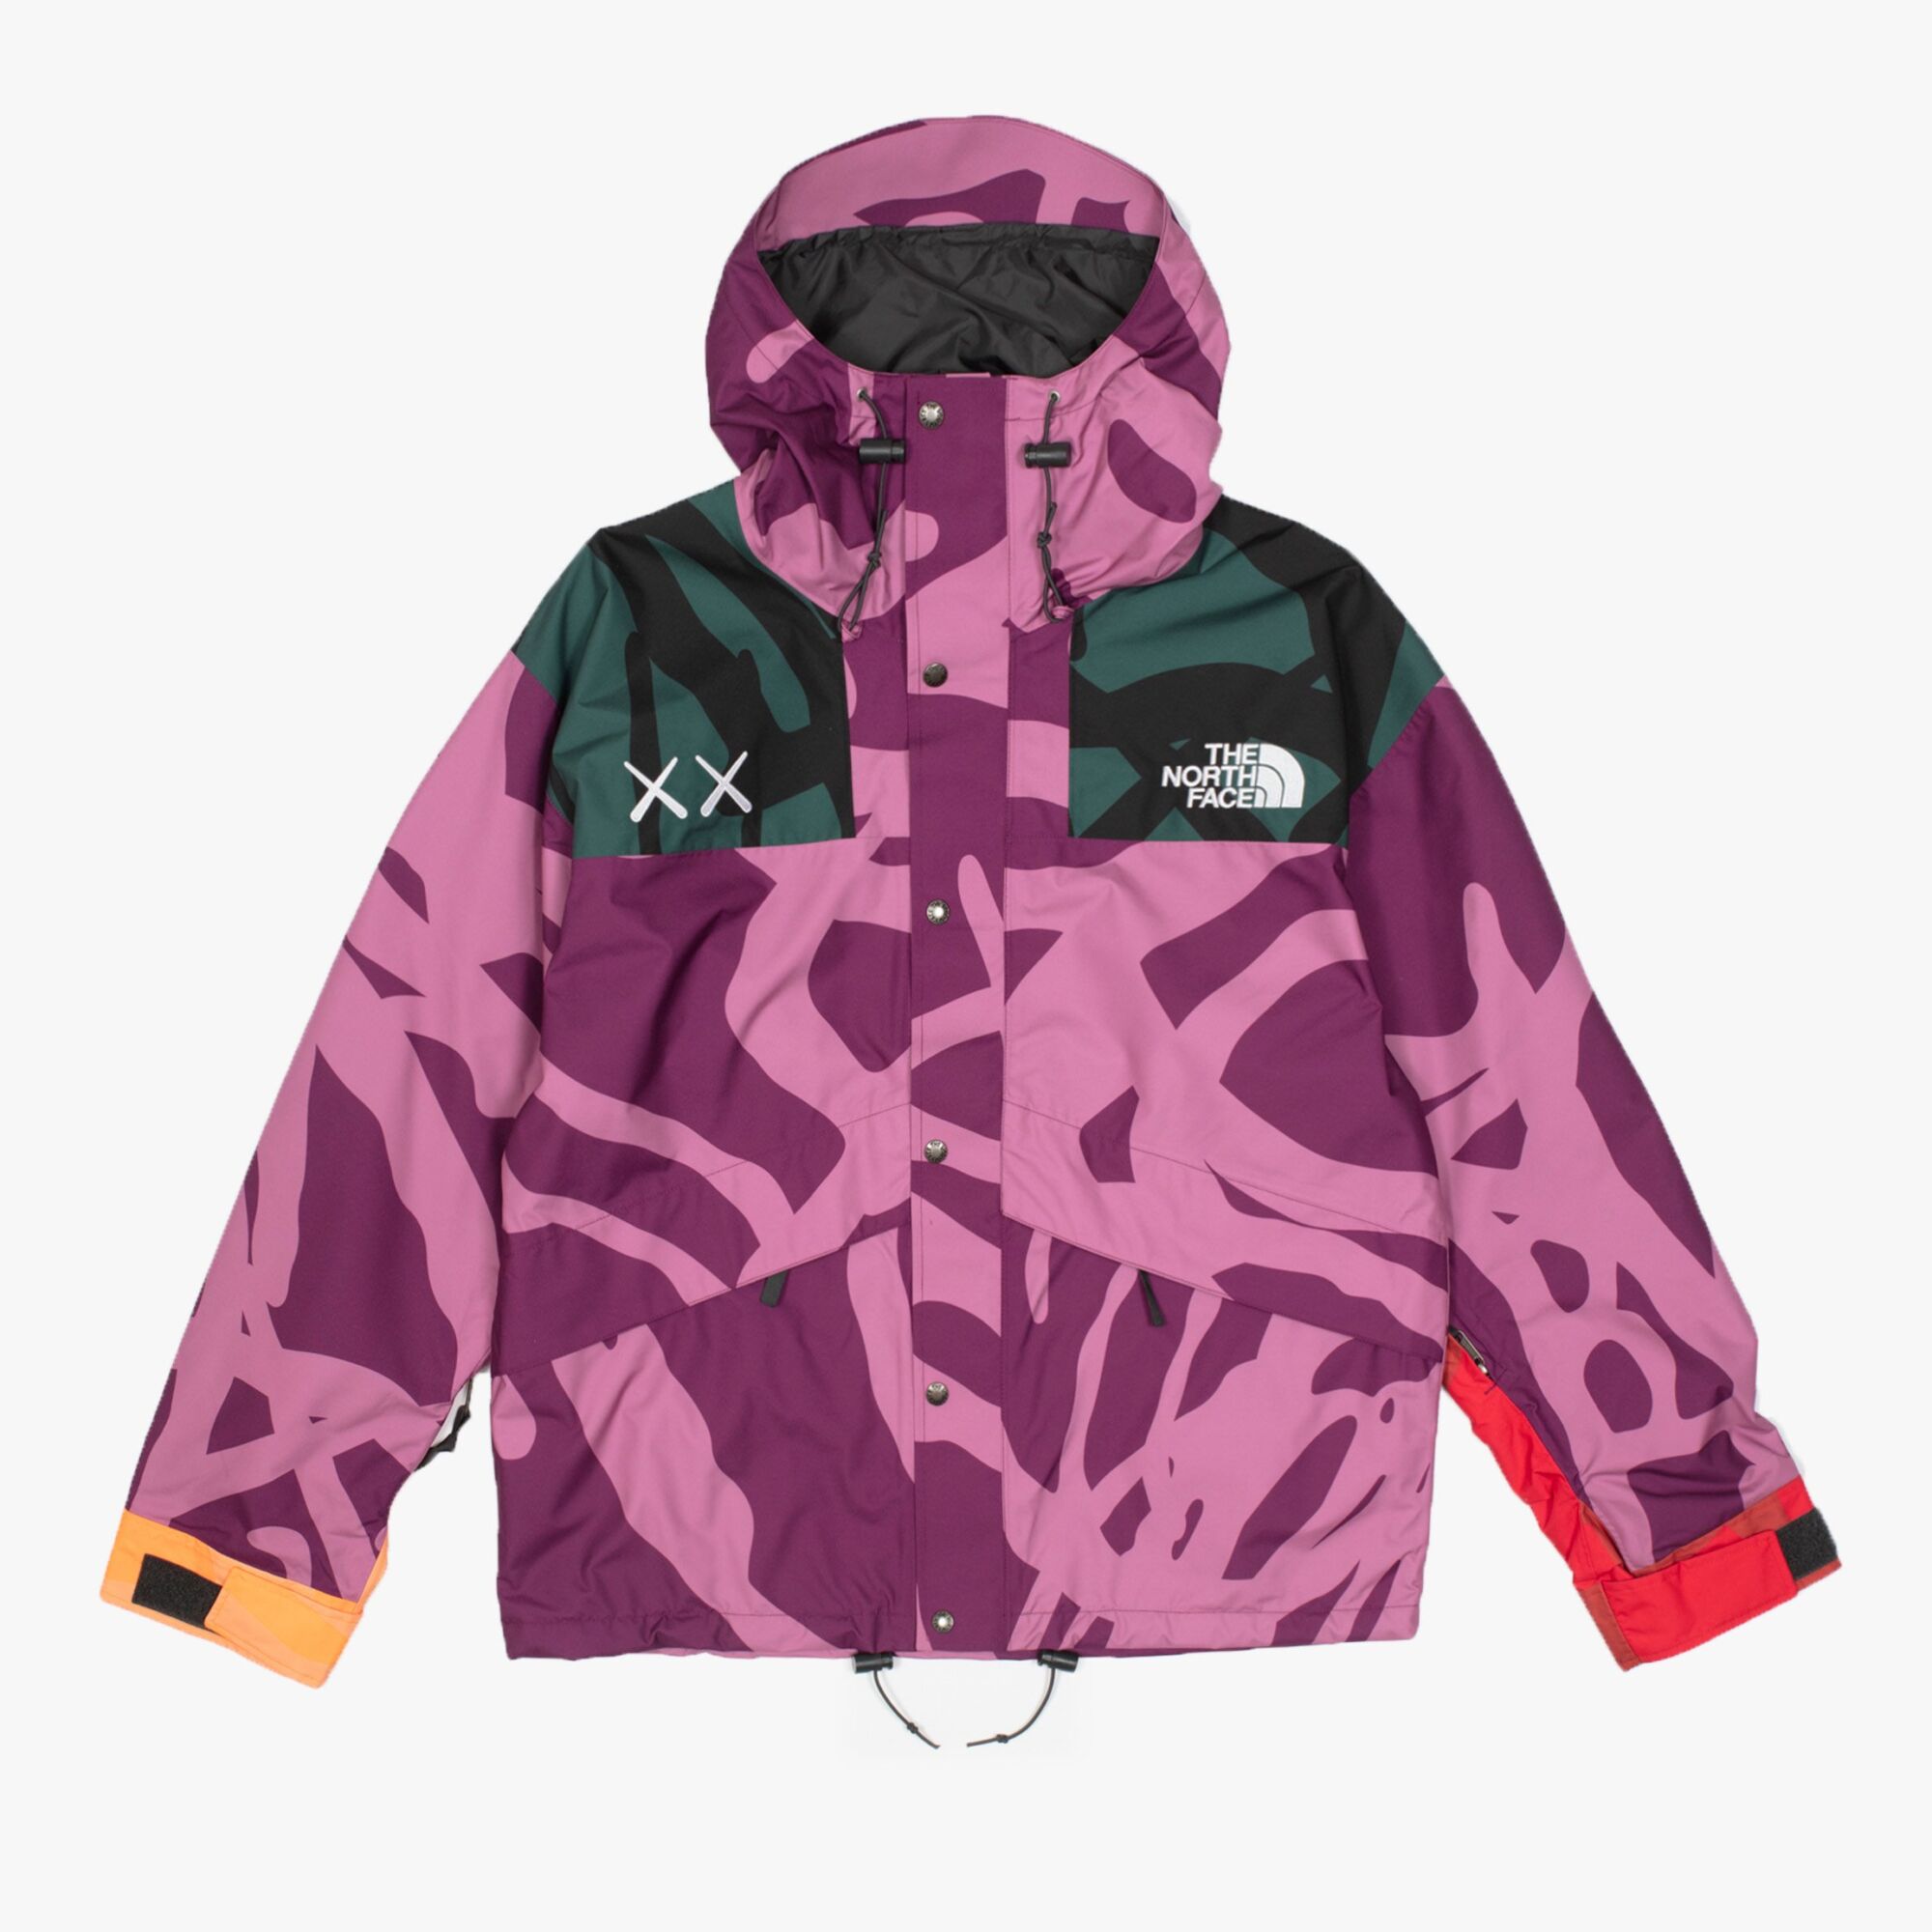 The Wick - KAWS x North Face retro pink jacket